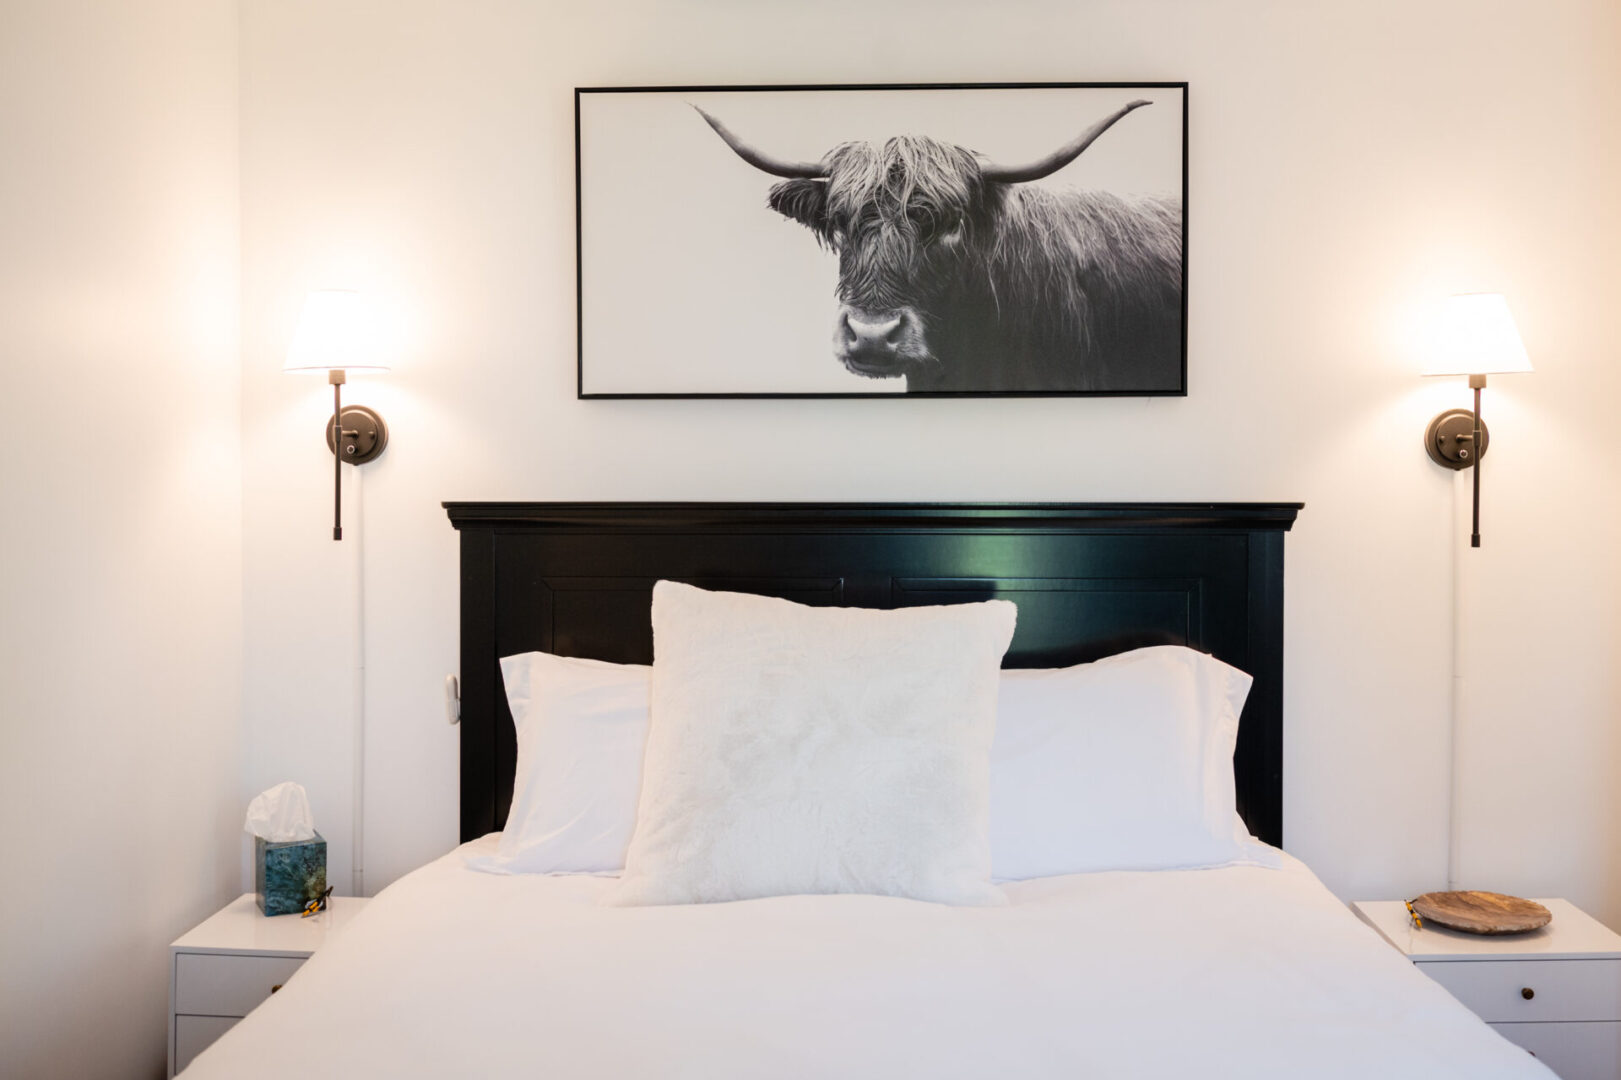 A black and white photo of a bull on the wall above a bed.